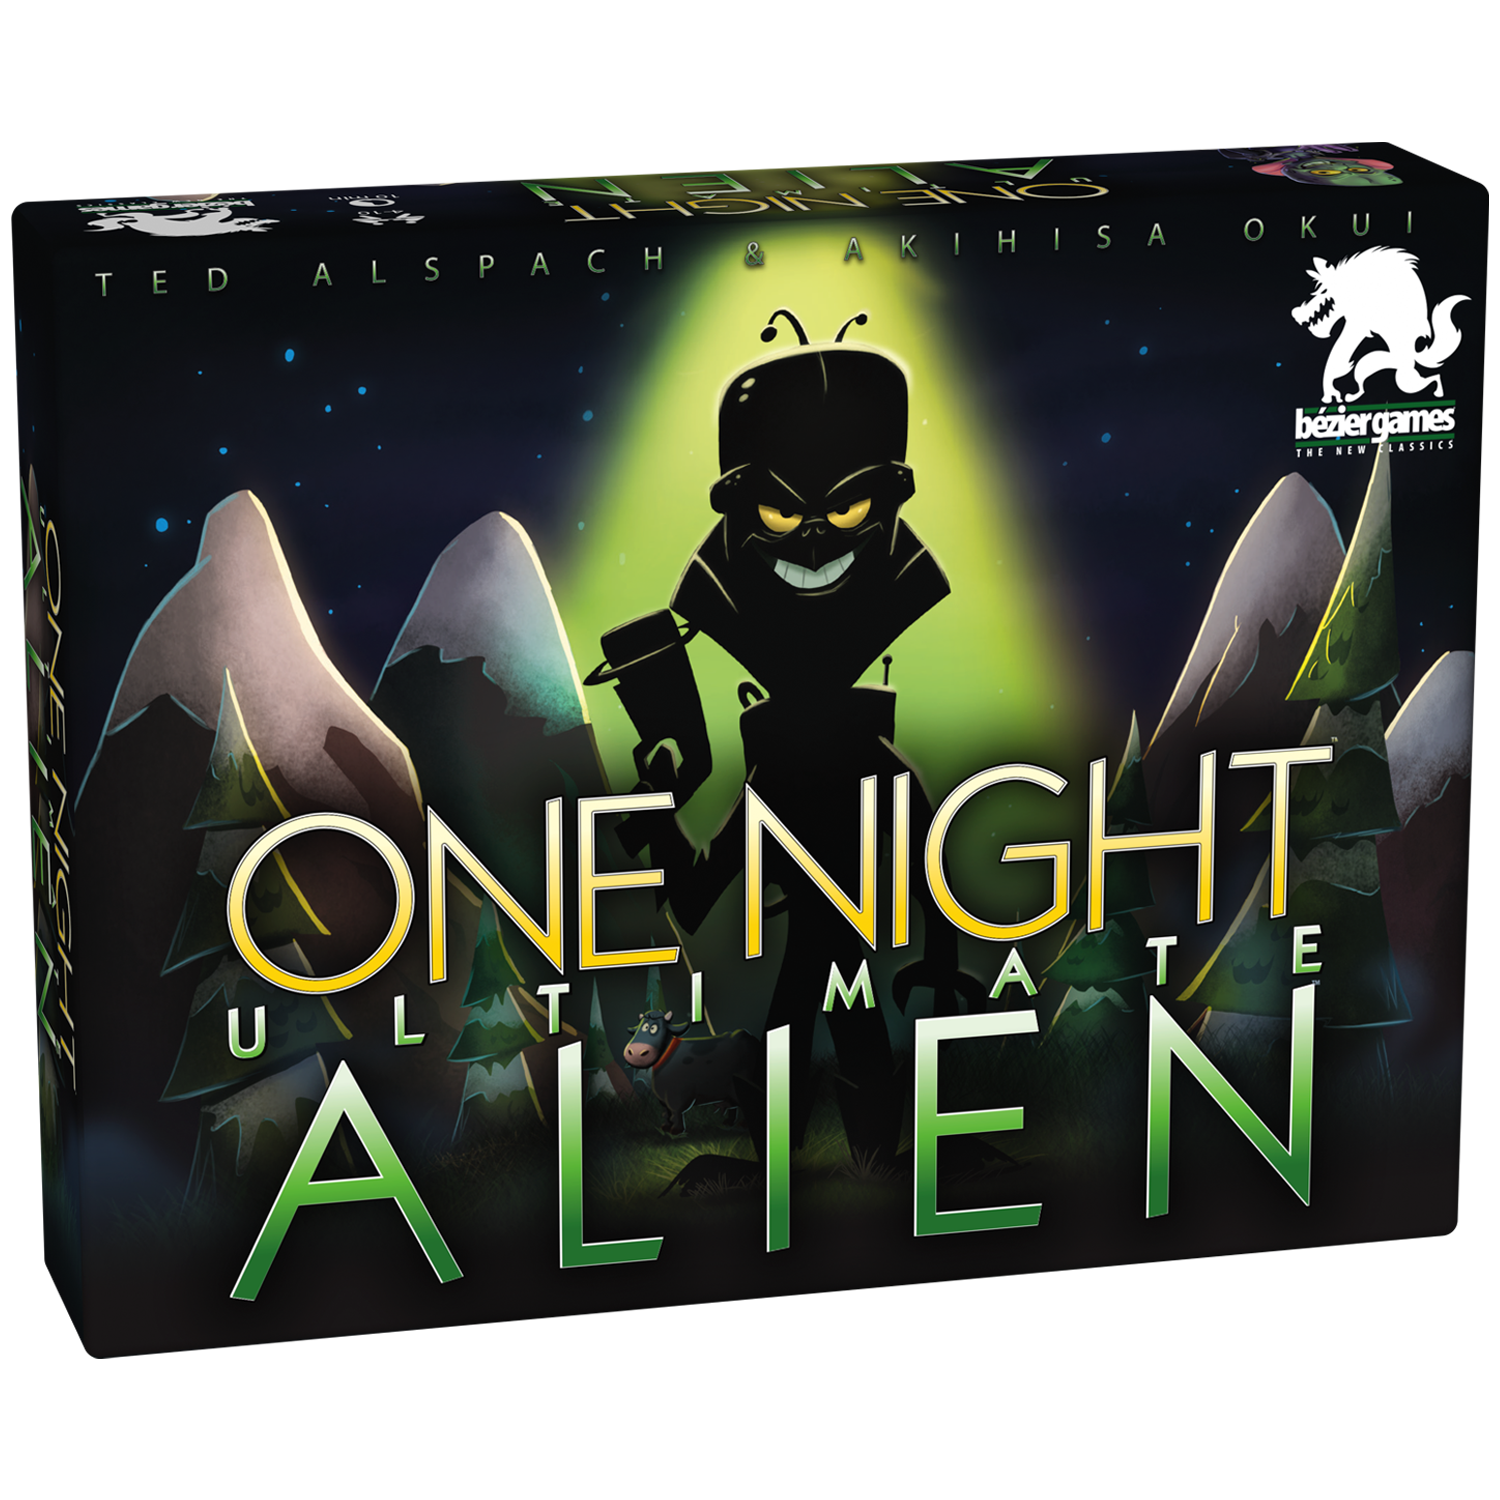  One Night Ultimate Werewolf – Fun Party Game for Kids